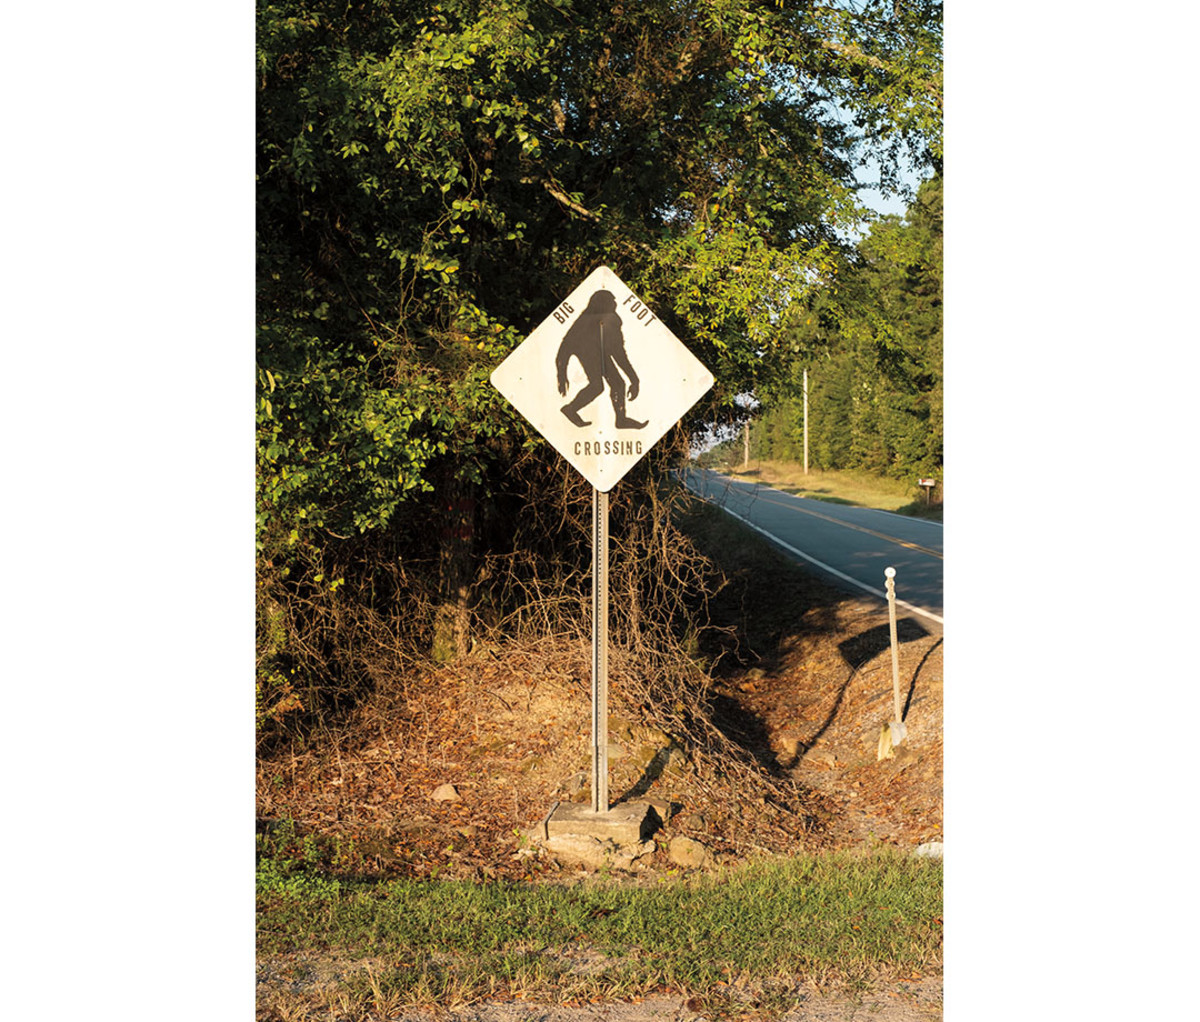 A traffic sign near Honobia, Oklahoma, where Bigfoot has been sighted dozens of times.